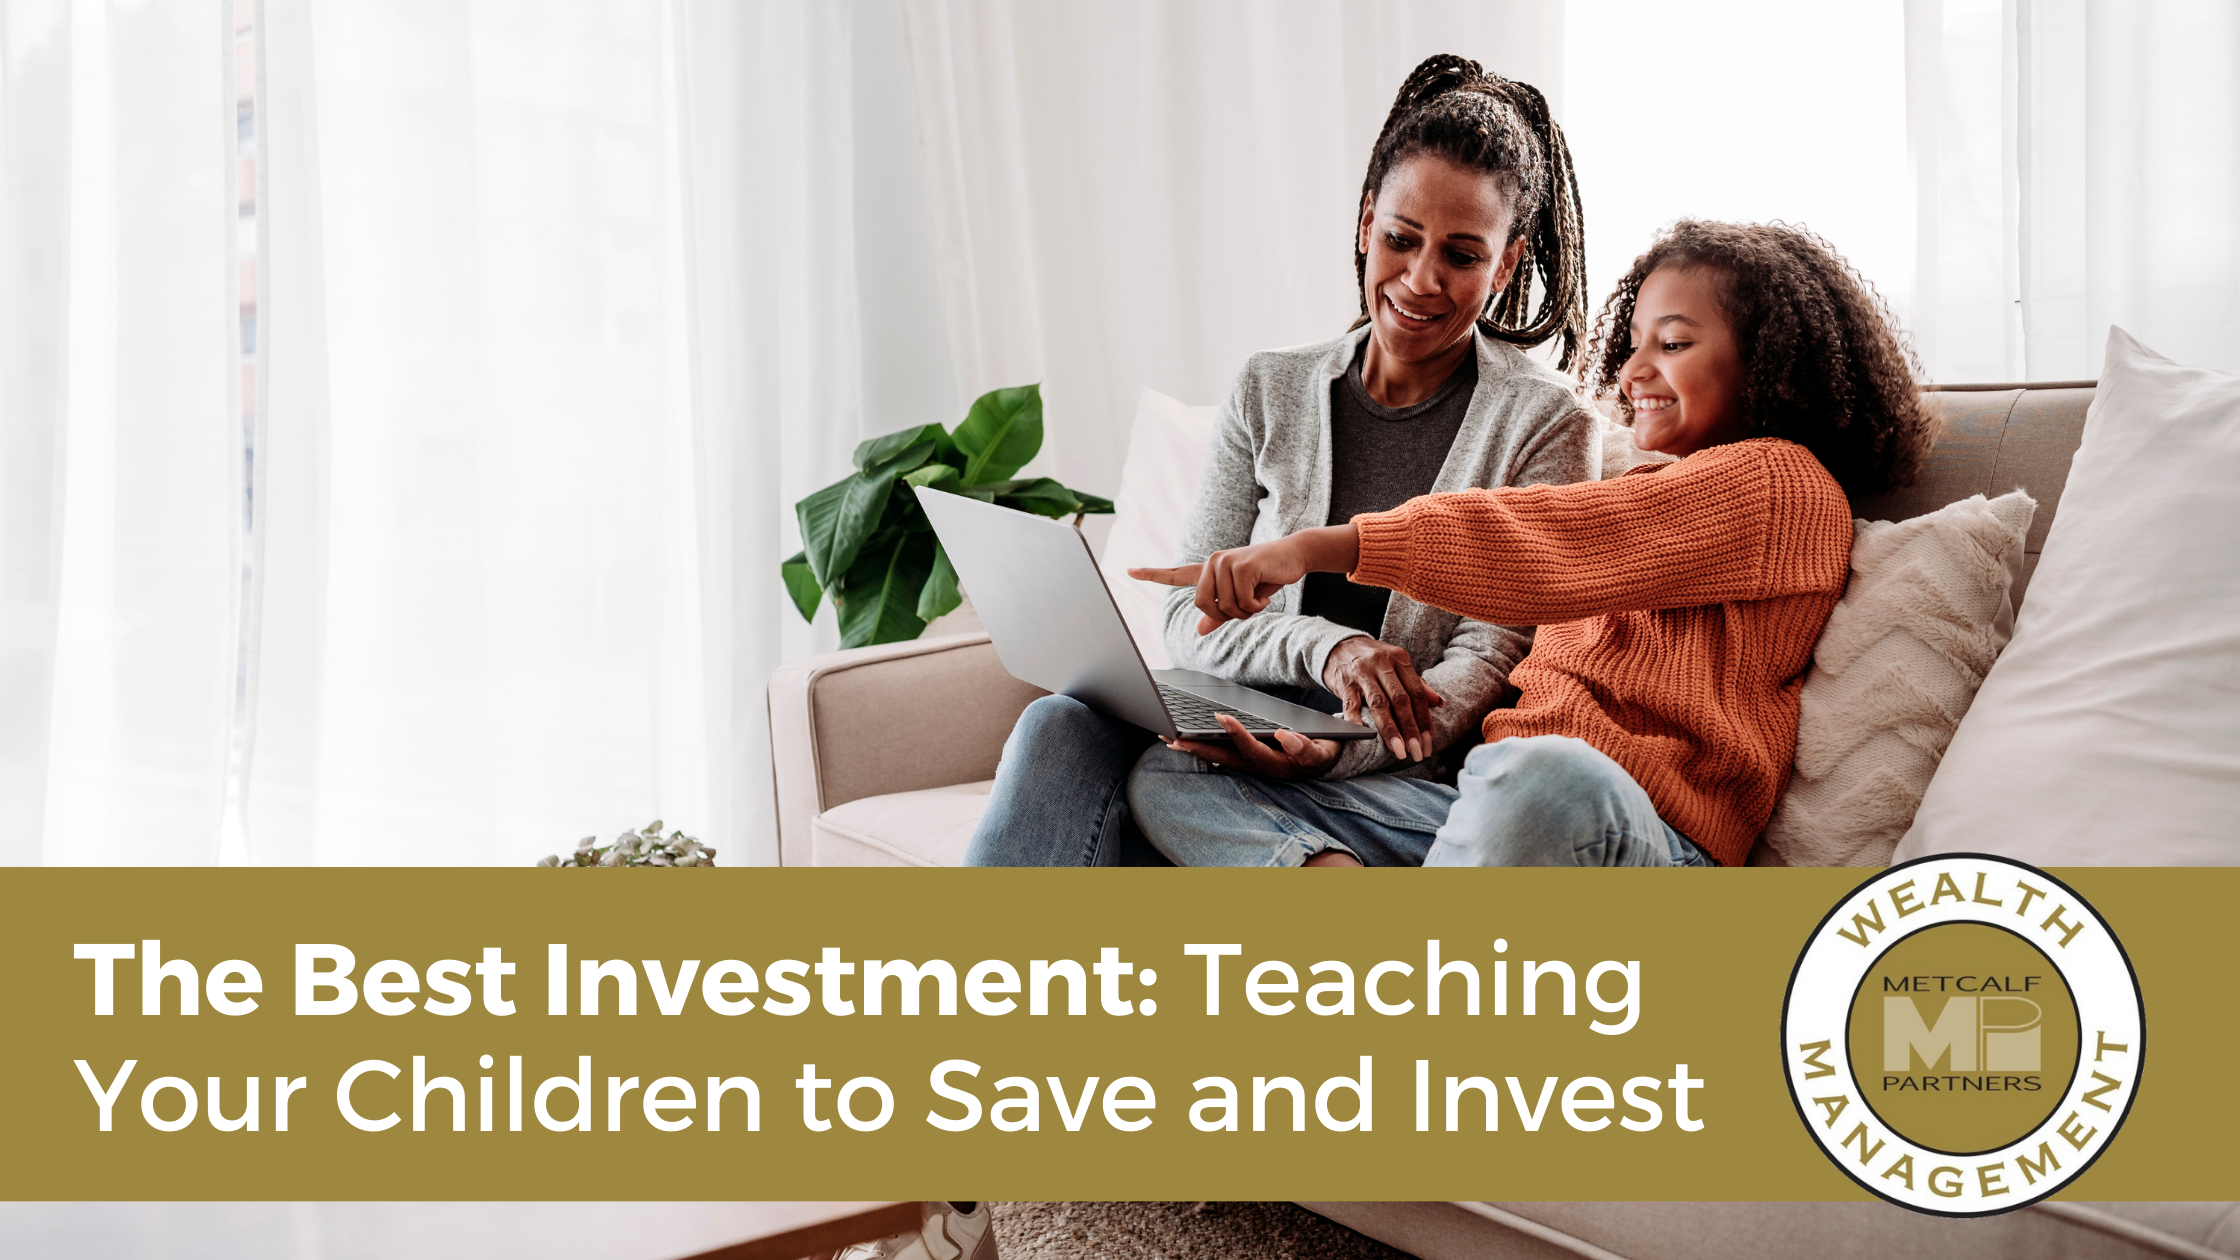 Featured image for “The Best Investment: Teaching Your Children to Save and Invest”